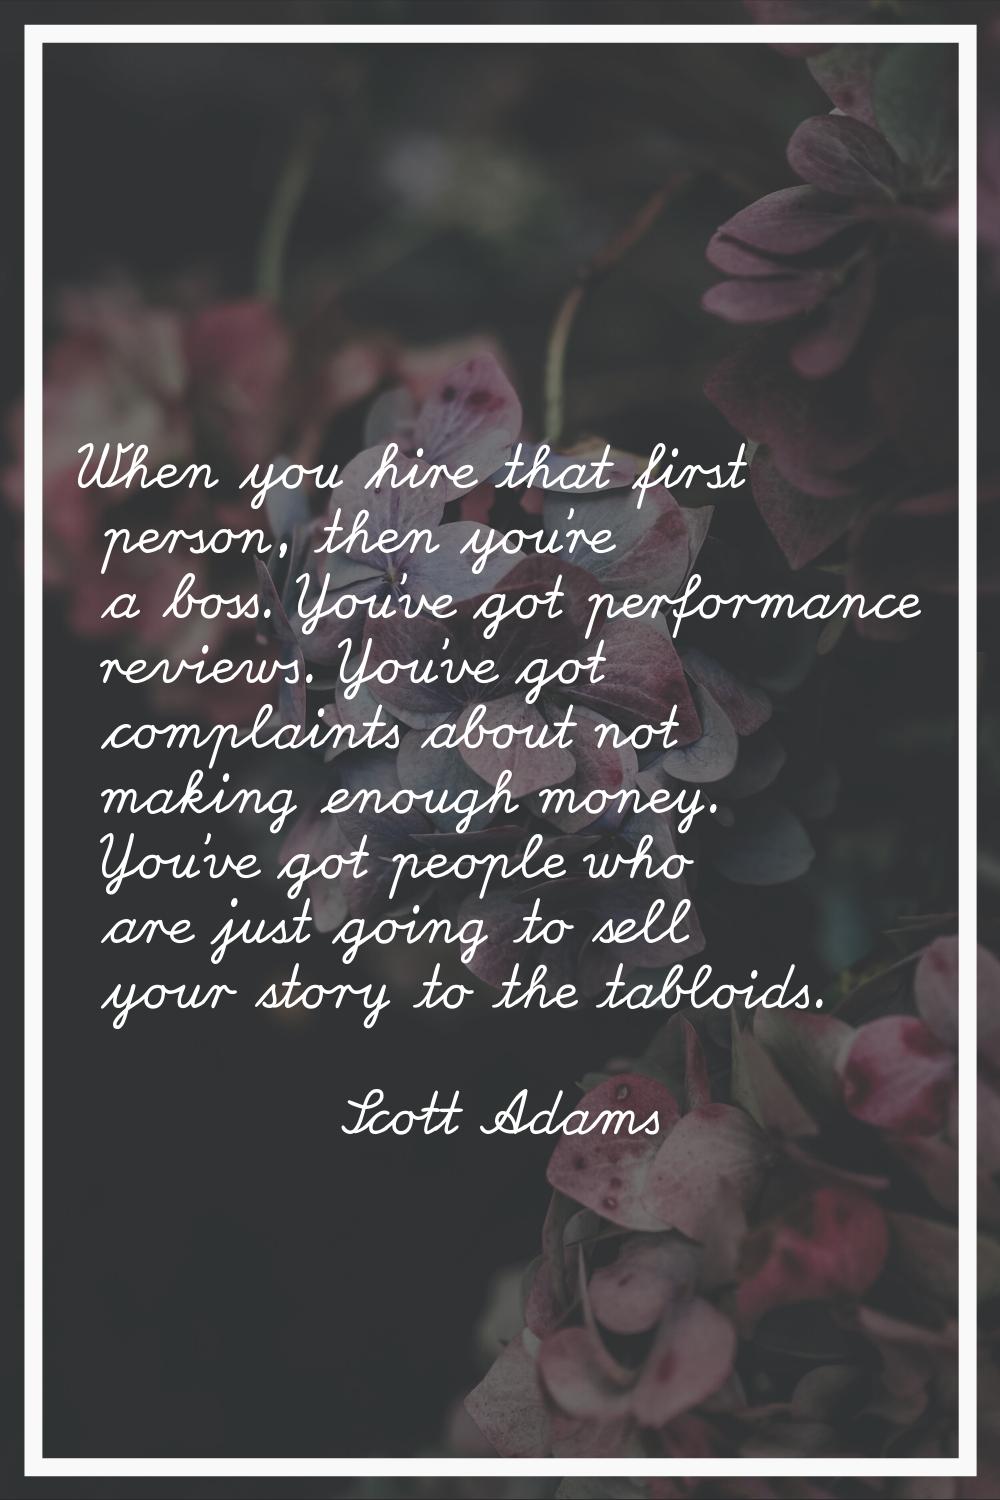 When you hire that first person, then you're a boss. You've got performance reviews. You've got com